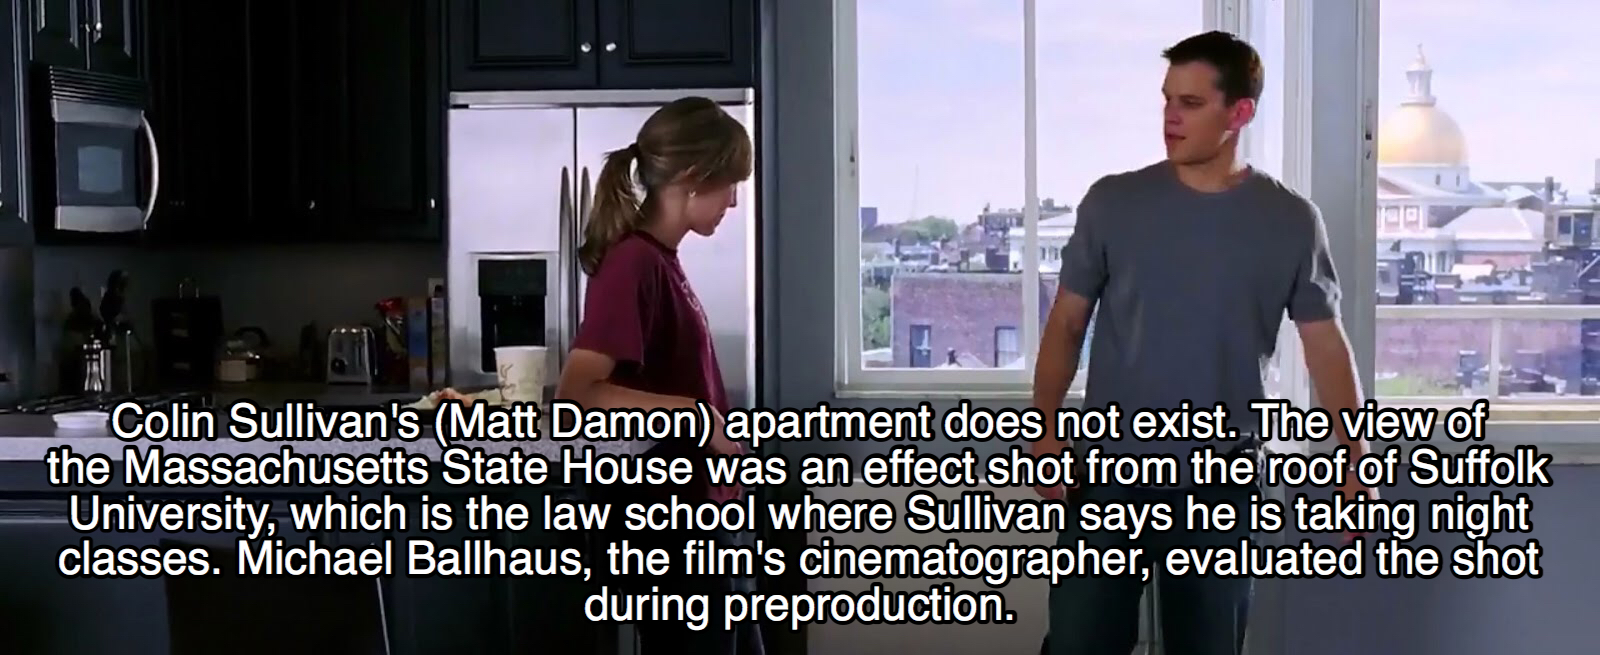 movie facts - departed suffolk law - Colin Sullivan's Matt Damon apartment does not exist. The view of the Massachusetts State House was an effect shot from the roof of Suffolk University, which is the law school where Sullivan says he is taking night cla